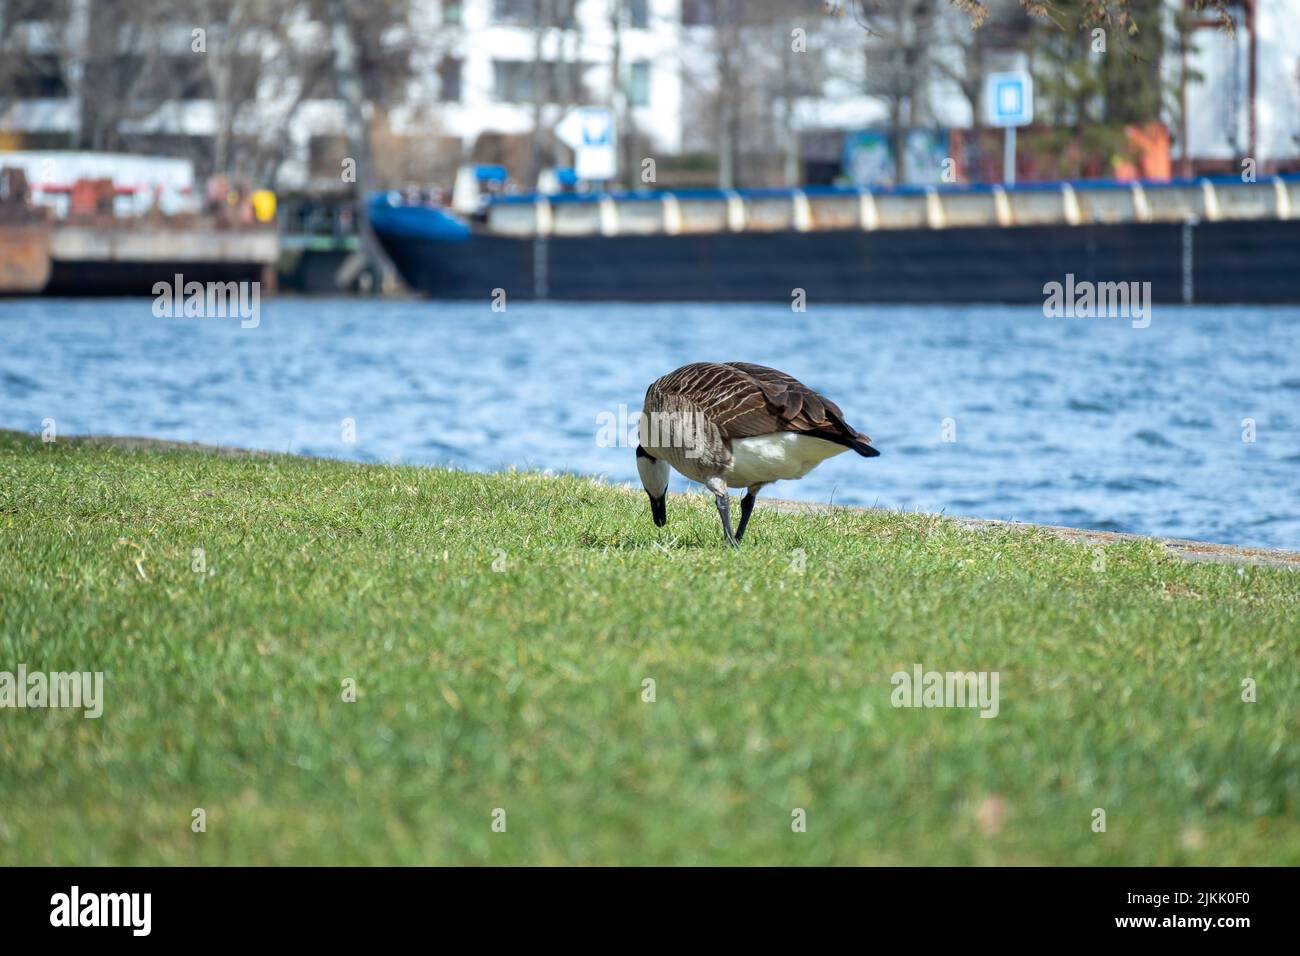 A shallow focus shot of a Canada Goose standing on the grass near the seashore Stock Photo